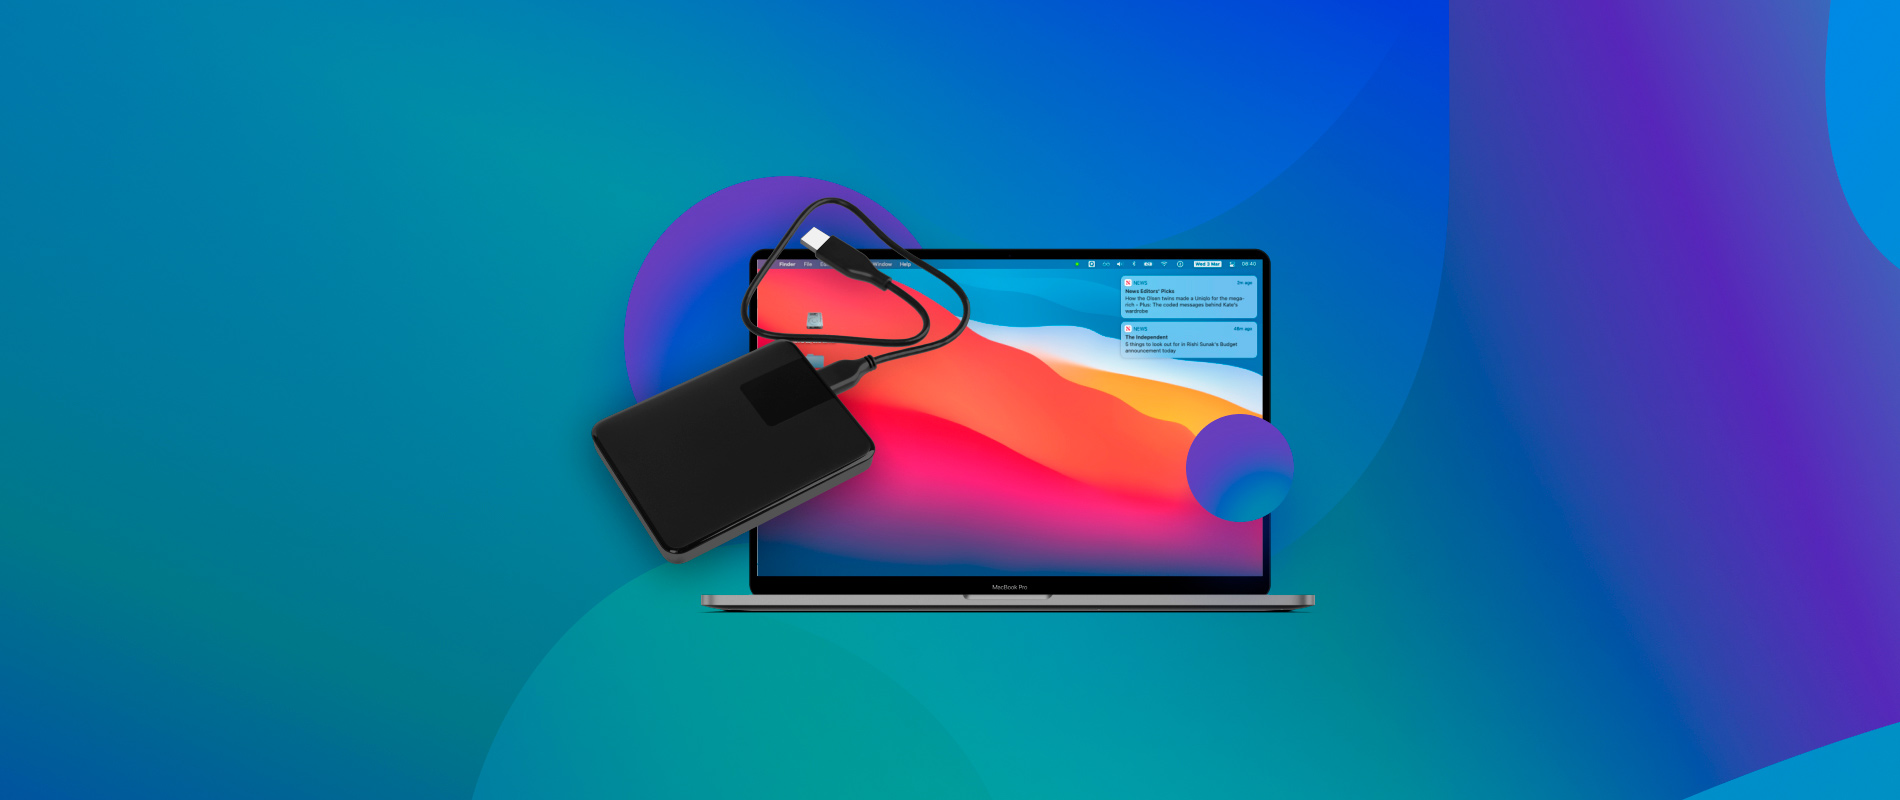 How to Recover Data From External Hard Drive on Mac: 5 Methods